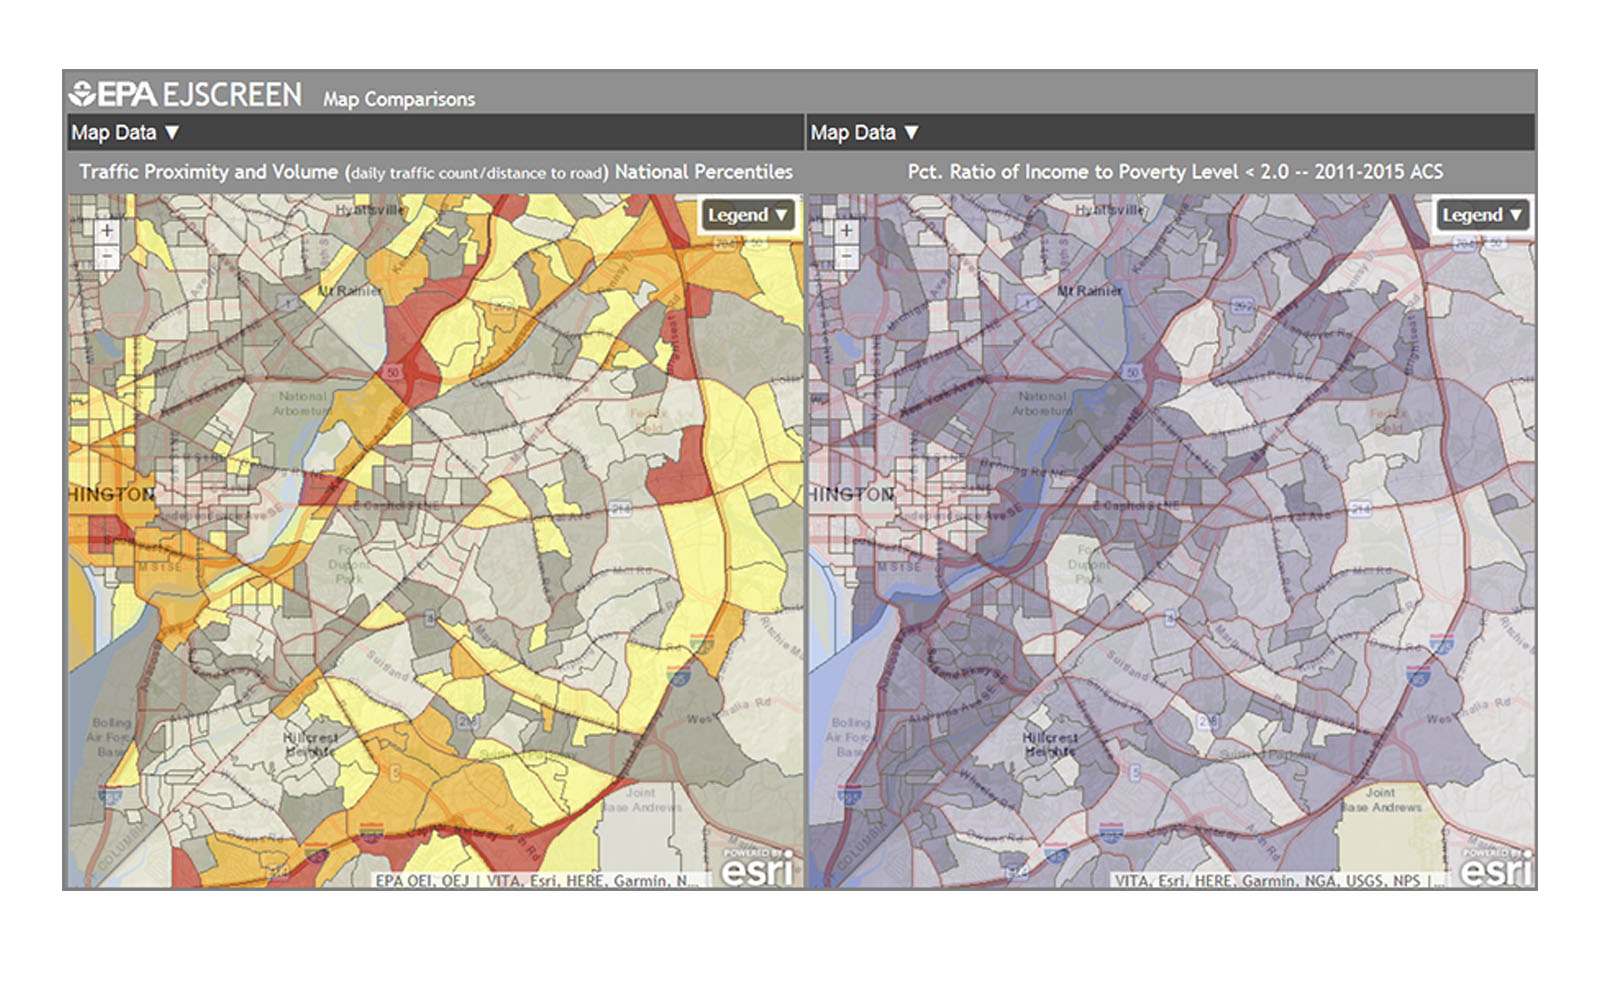 Screenshot of the EJSCREEN tool, with side-by-side maps of the same place; one highlights proximity and volume, the other highlights percent ratio of income to poverty level under 2.0